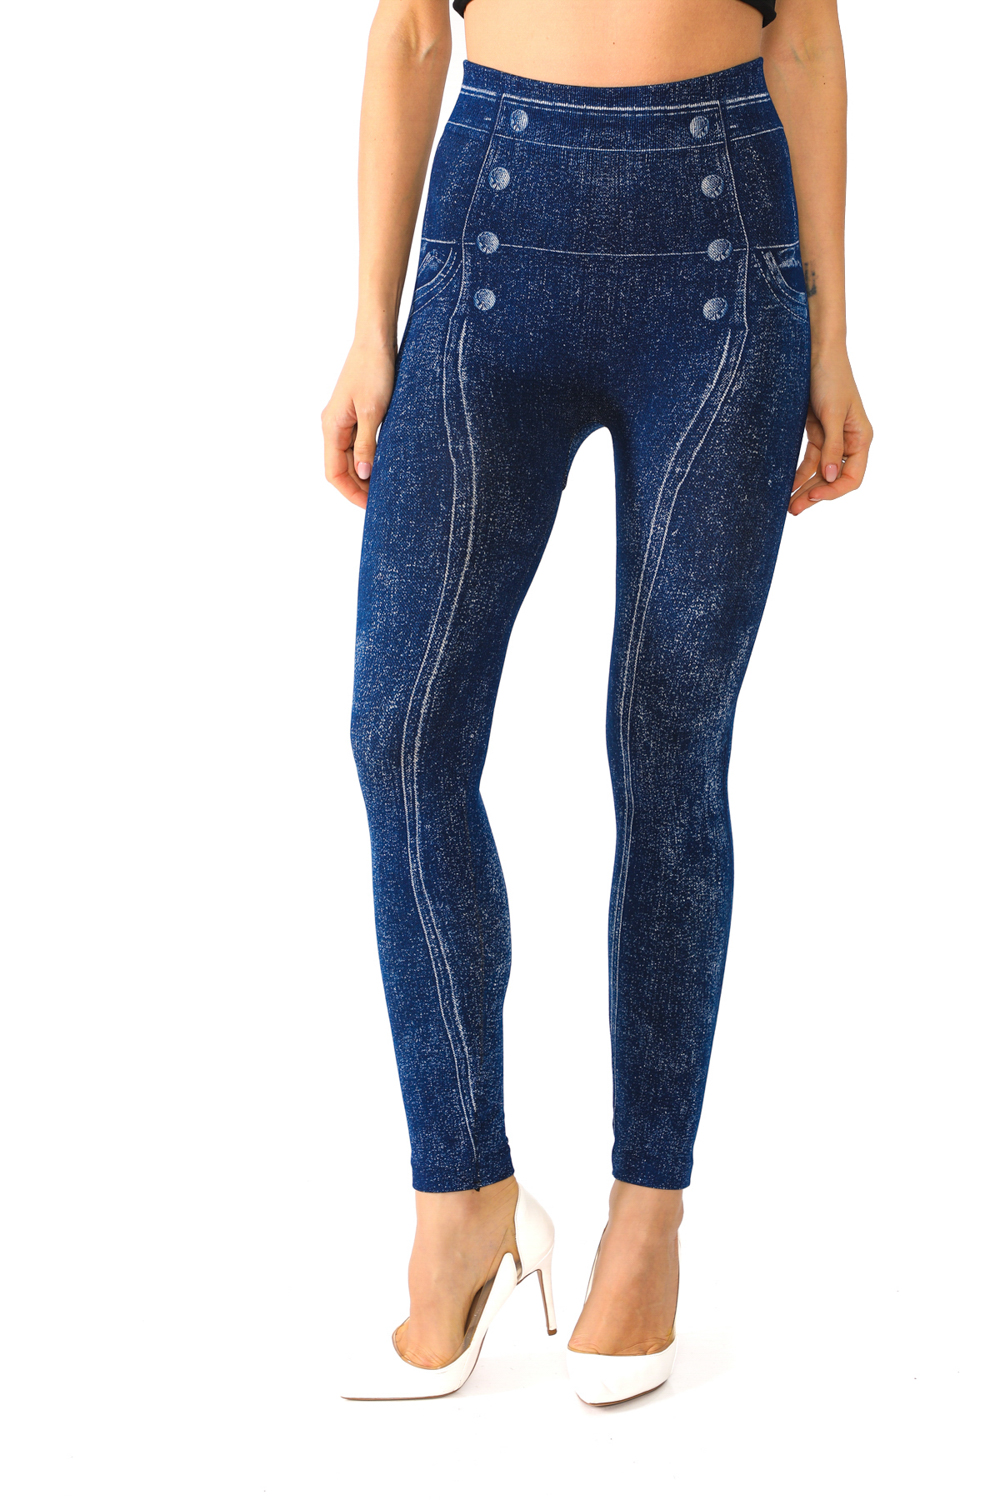 Denim Leggings with Side Button and Stripe Pattern